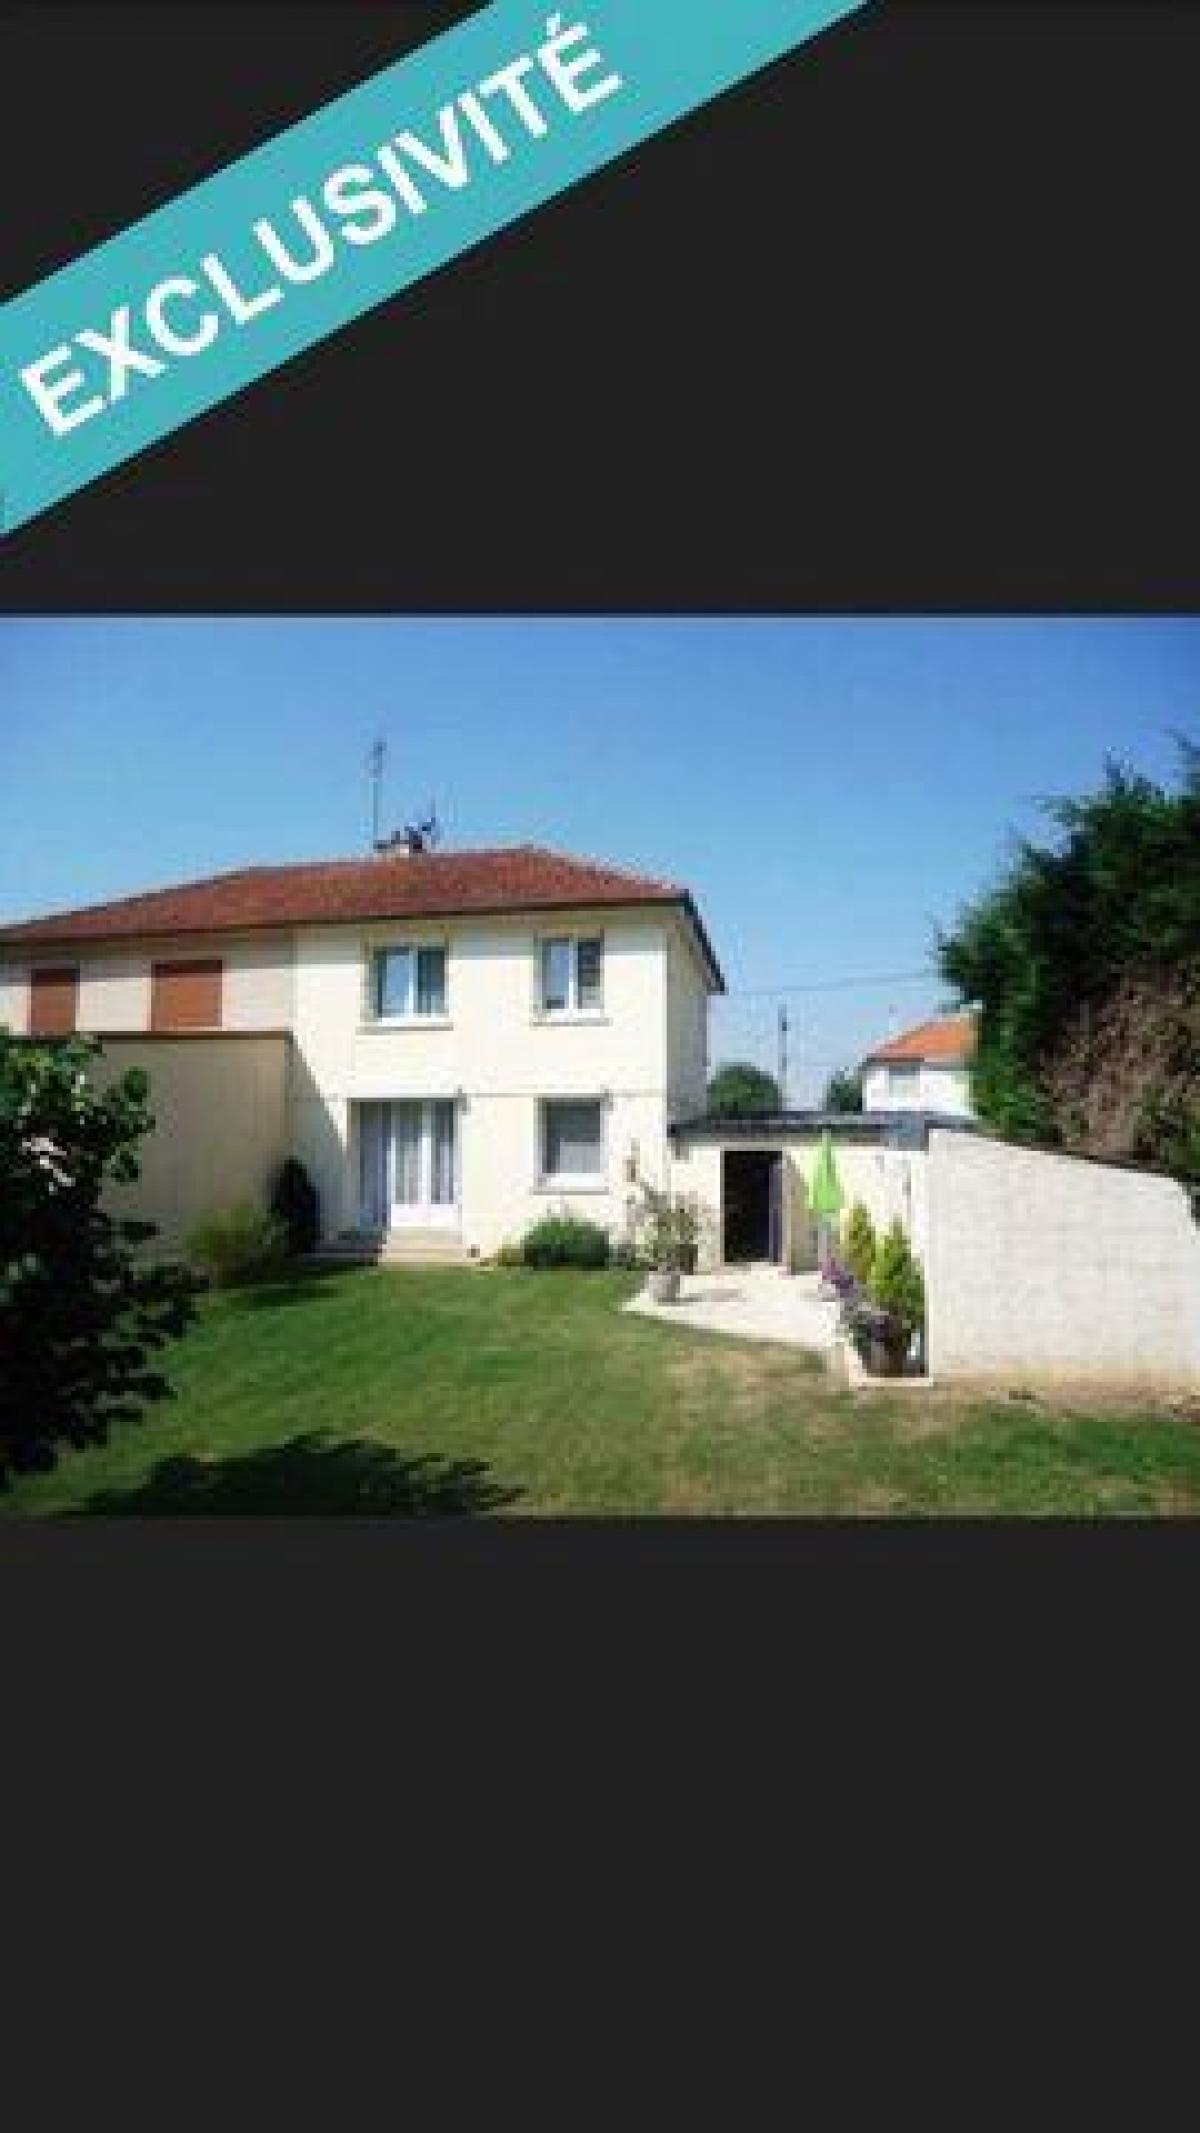 Picture of Home For Sale in Vervins, Picardie, France